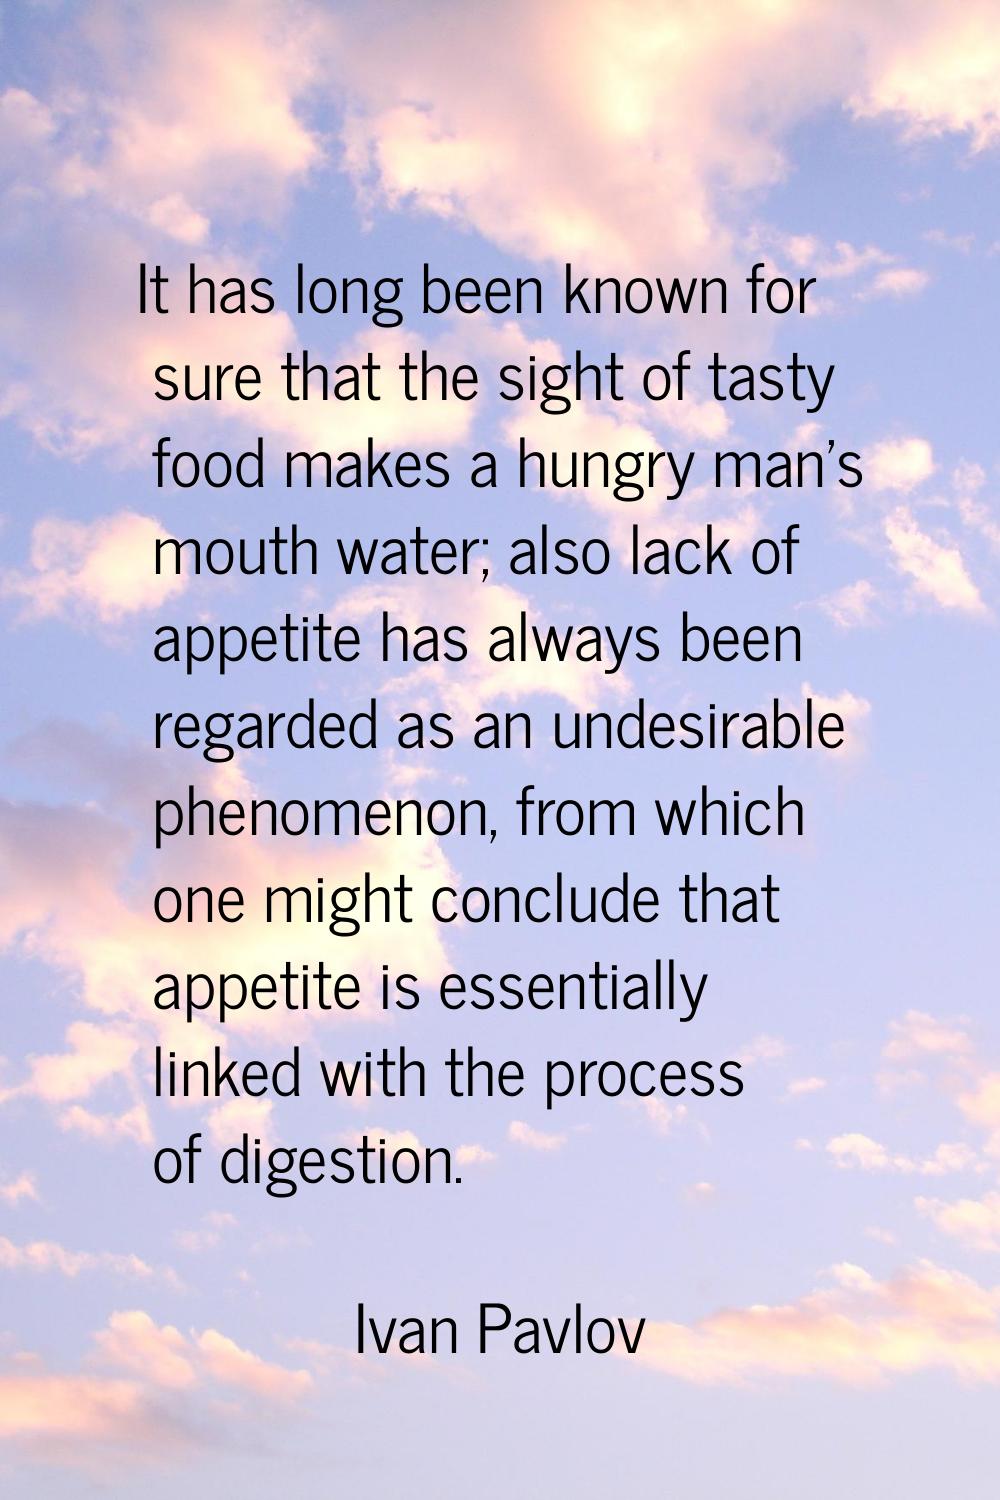 It has long been known for sure that the sight of tasty food makes a hungry man's mouth water; also